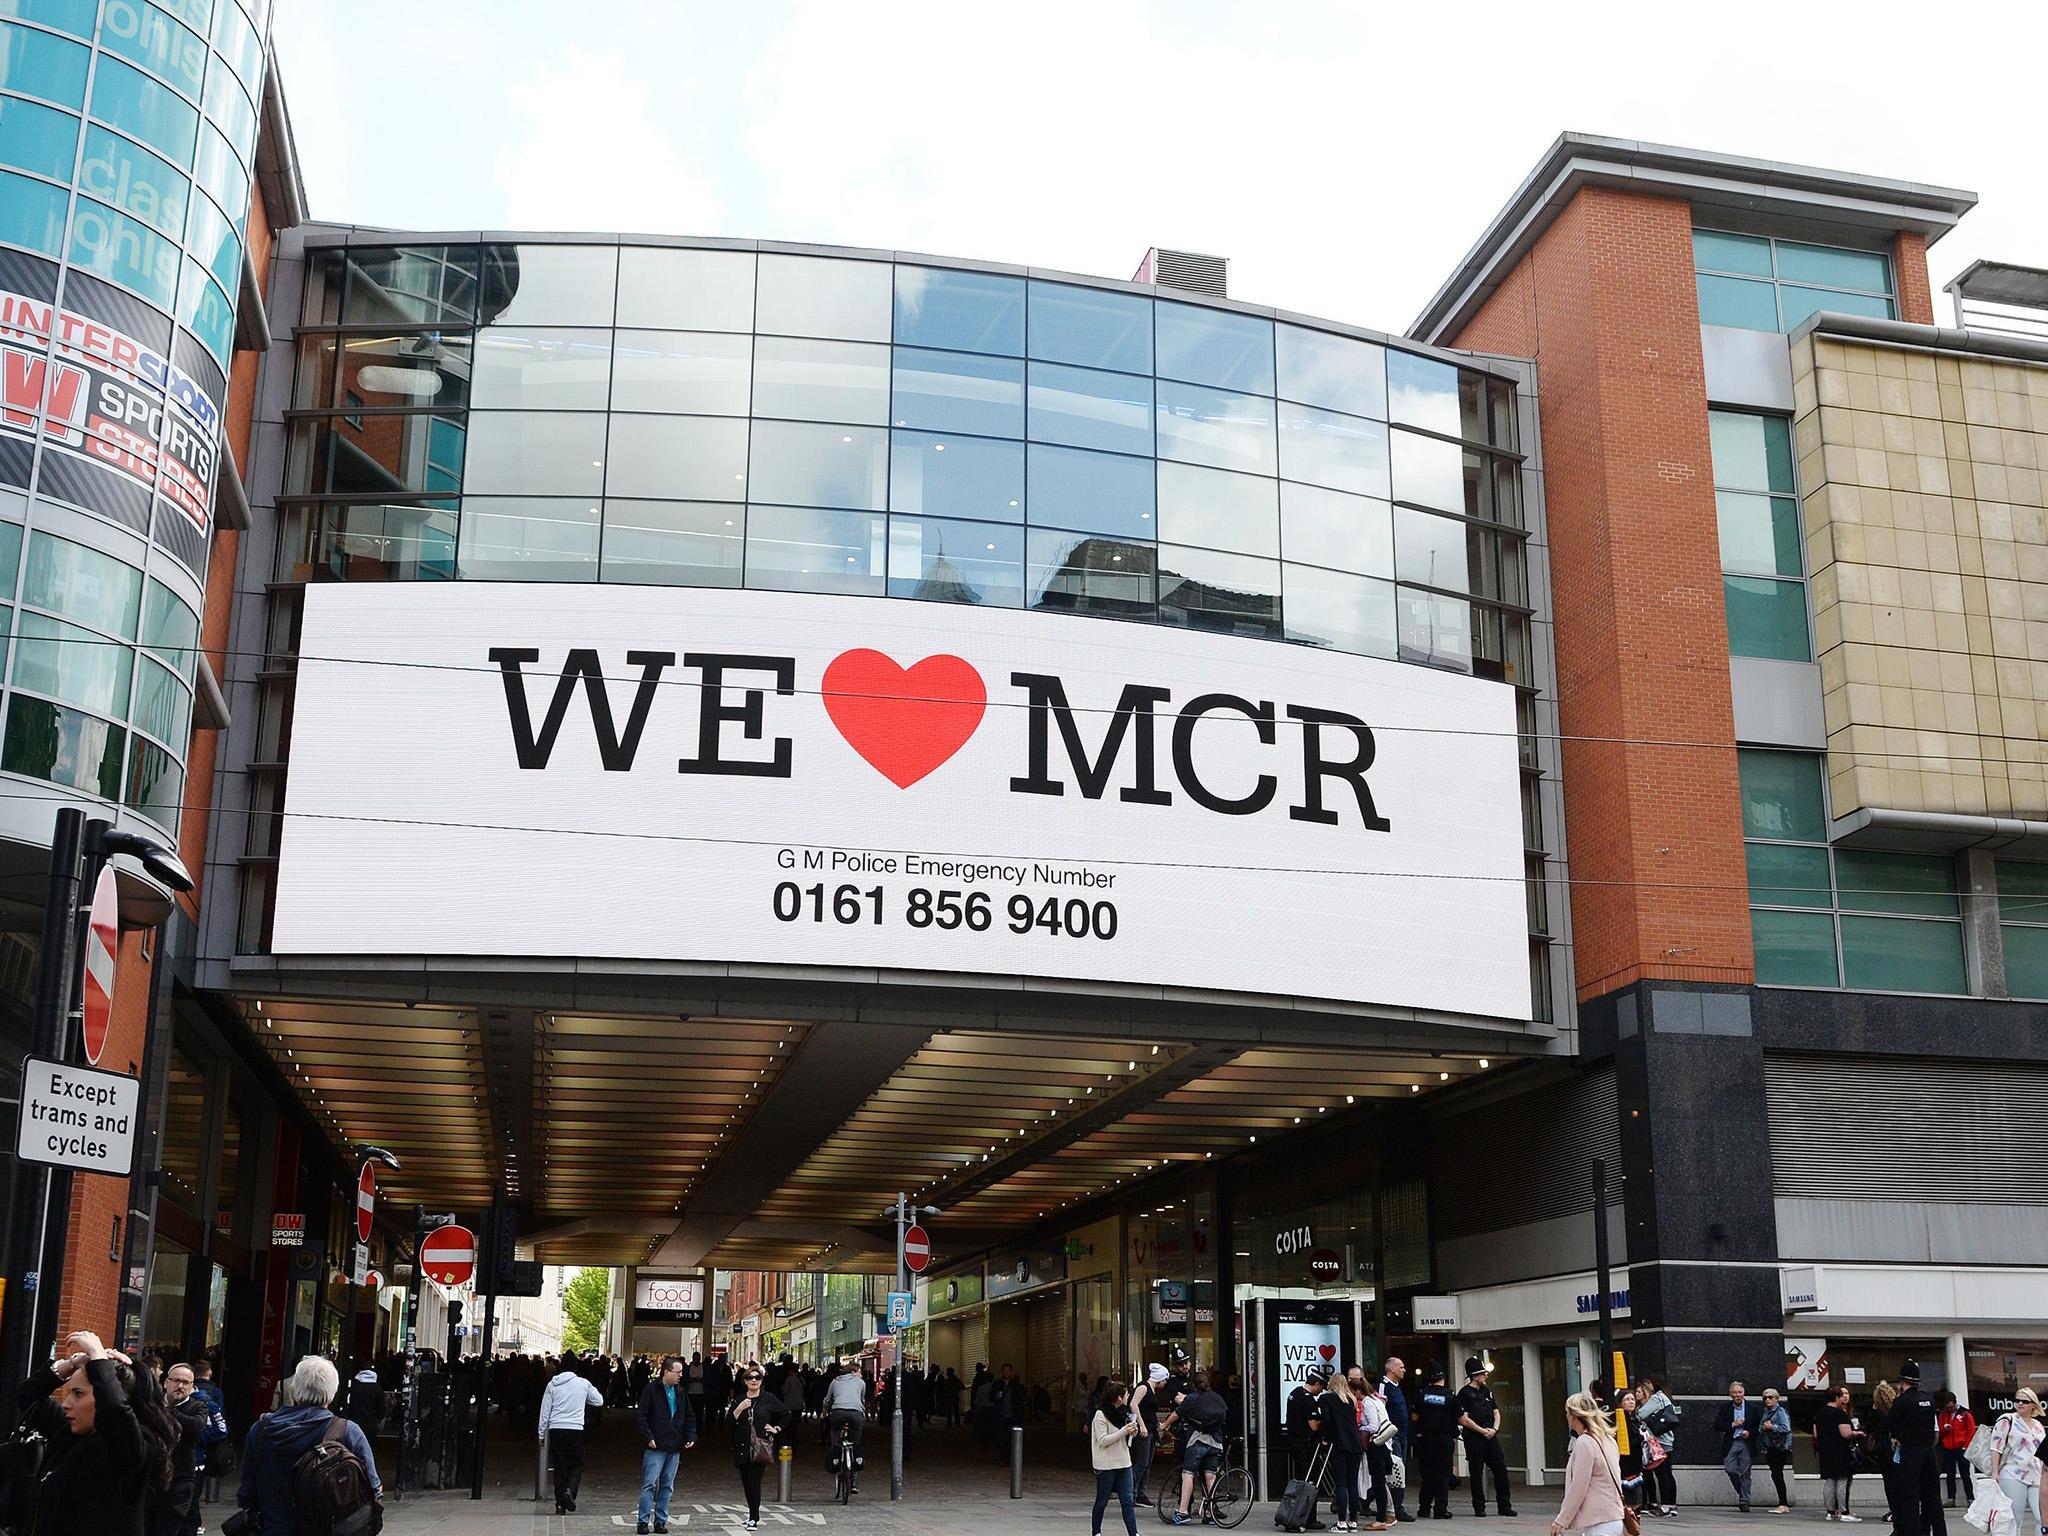 Banners with the message "We Love MCR" are being displayed across the city after last night's atrocity